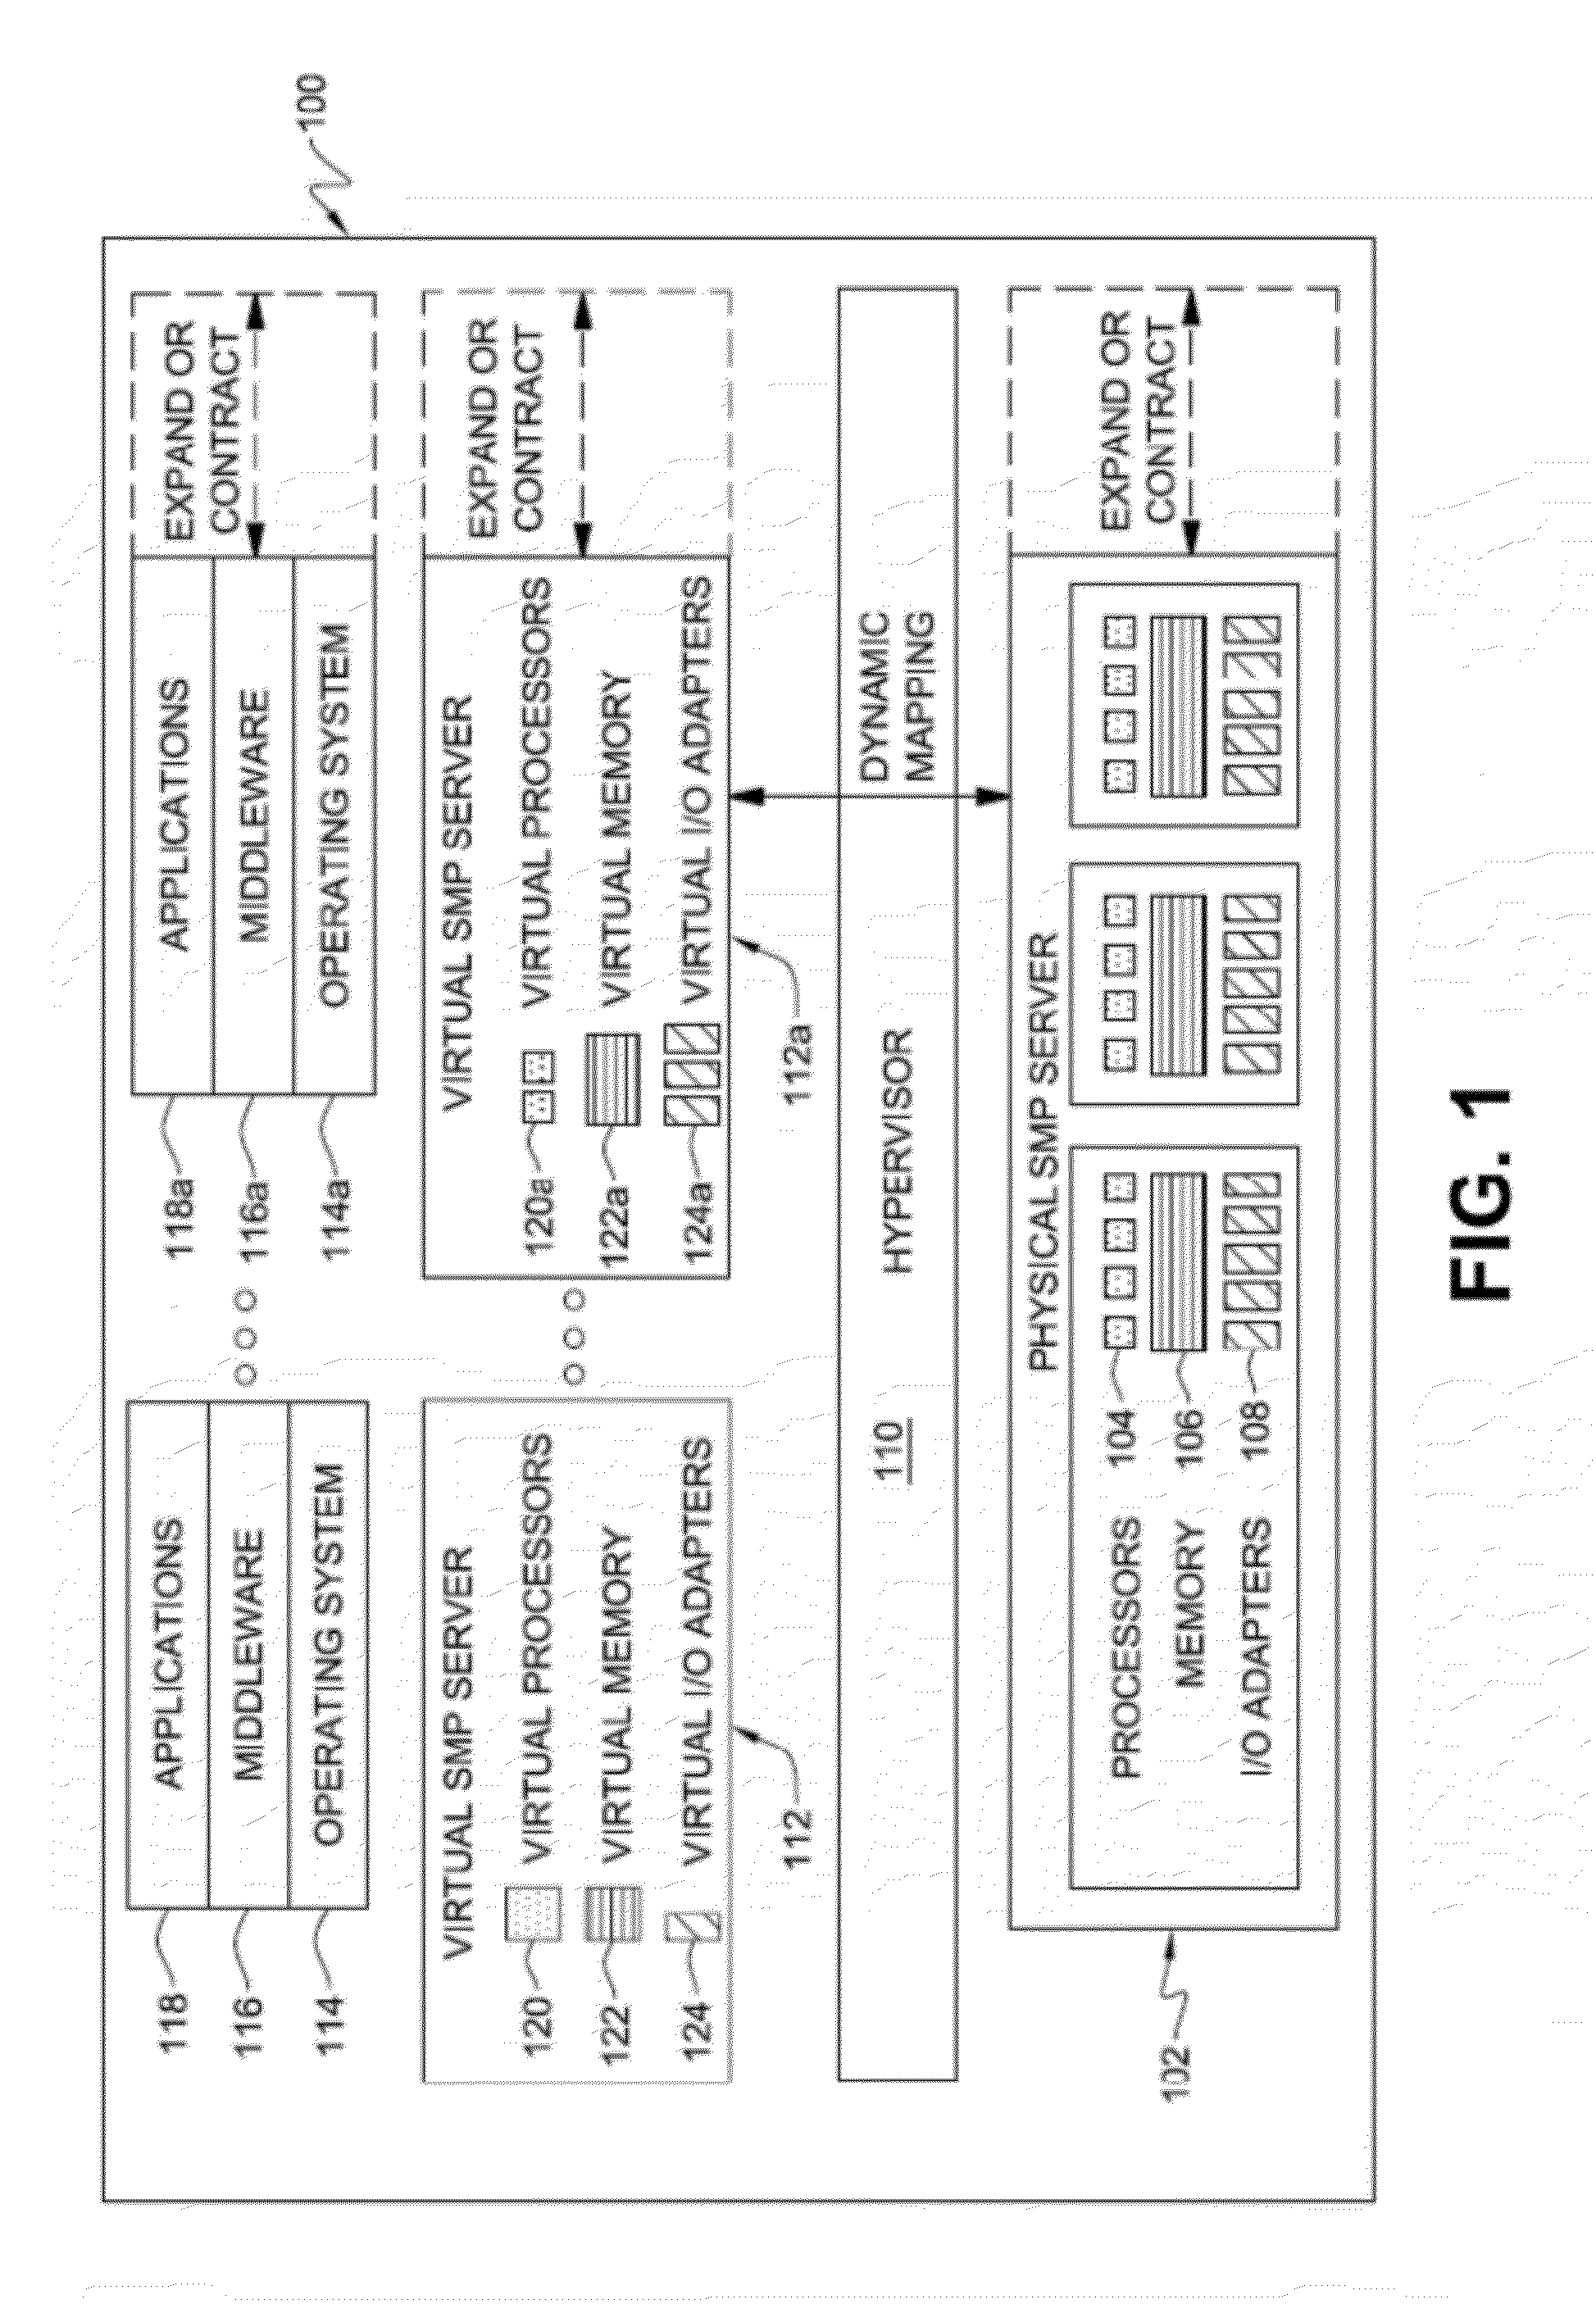 Virtualization of vendor specific network interfaces of self-virtualizing input/output device virtual functions